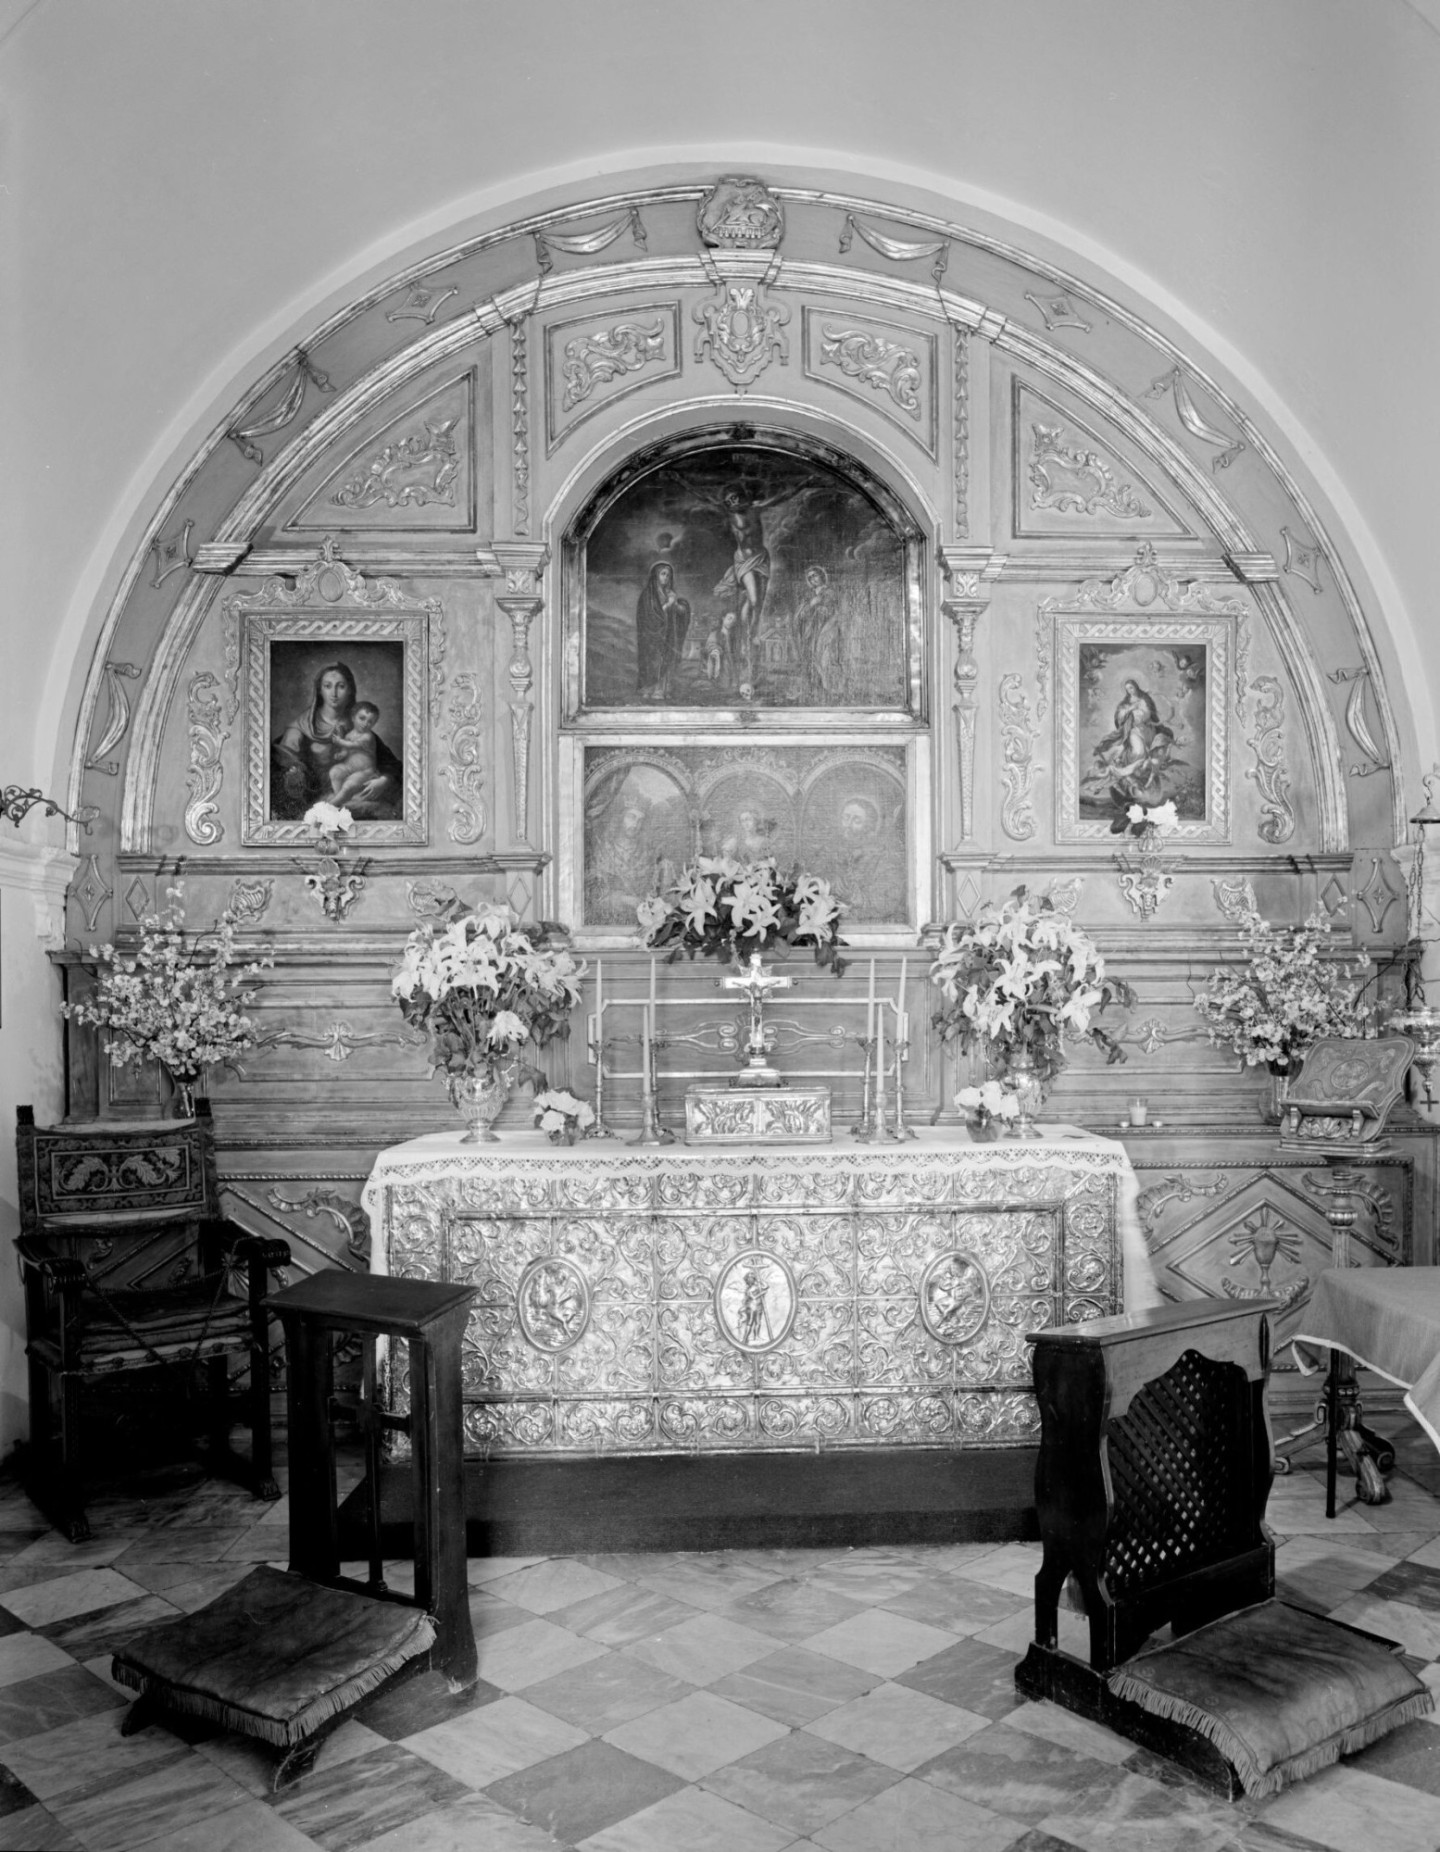 A black and white photo of an altar in an arced alcove with ornate carvings and paintings of the Christ in life, the Virgin Mary and the Cruxifiction.